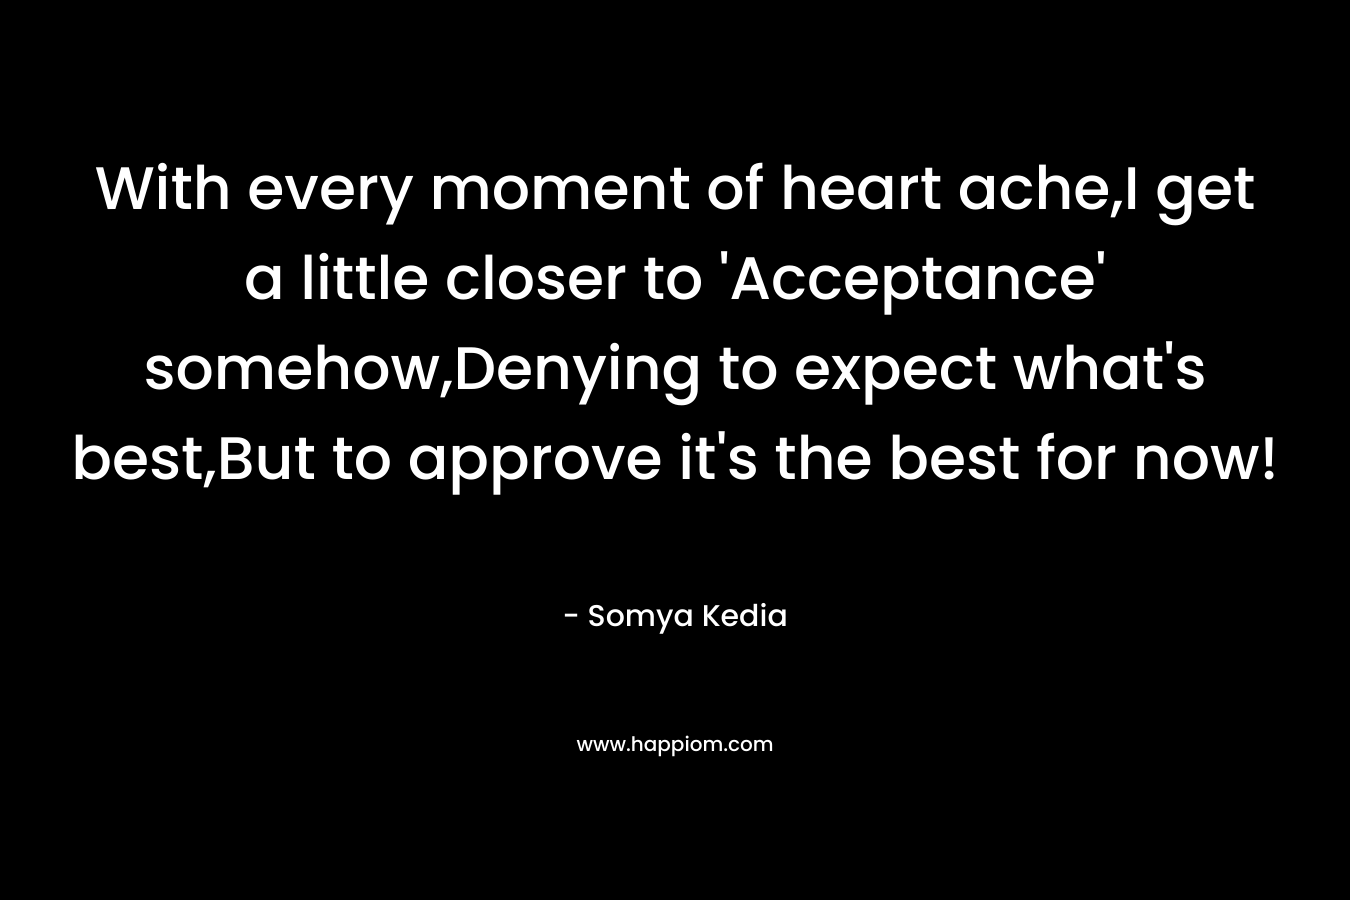 With every moment of heart ache,I get a little closer to 'Acceptance' somehow,Denying to expect what's best,But to approve it's the best for now!